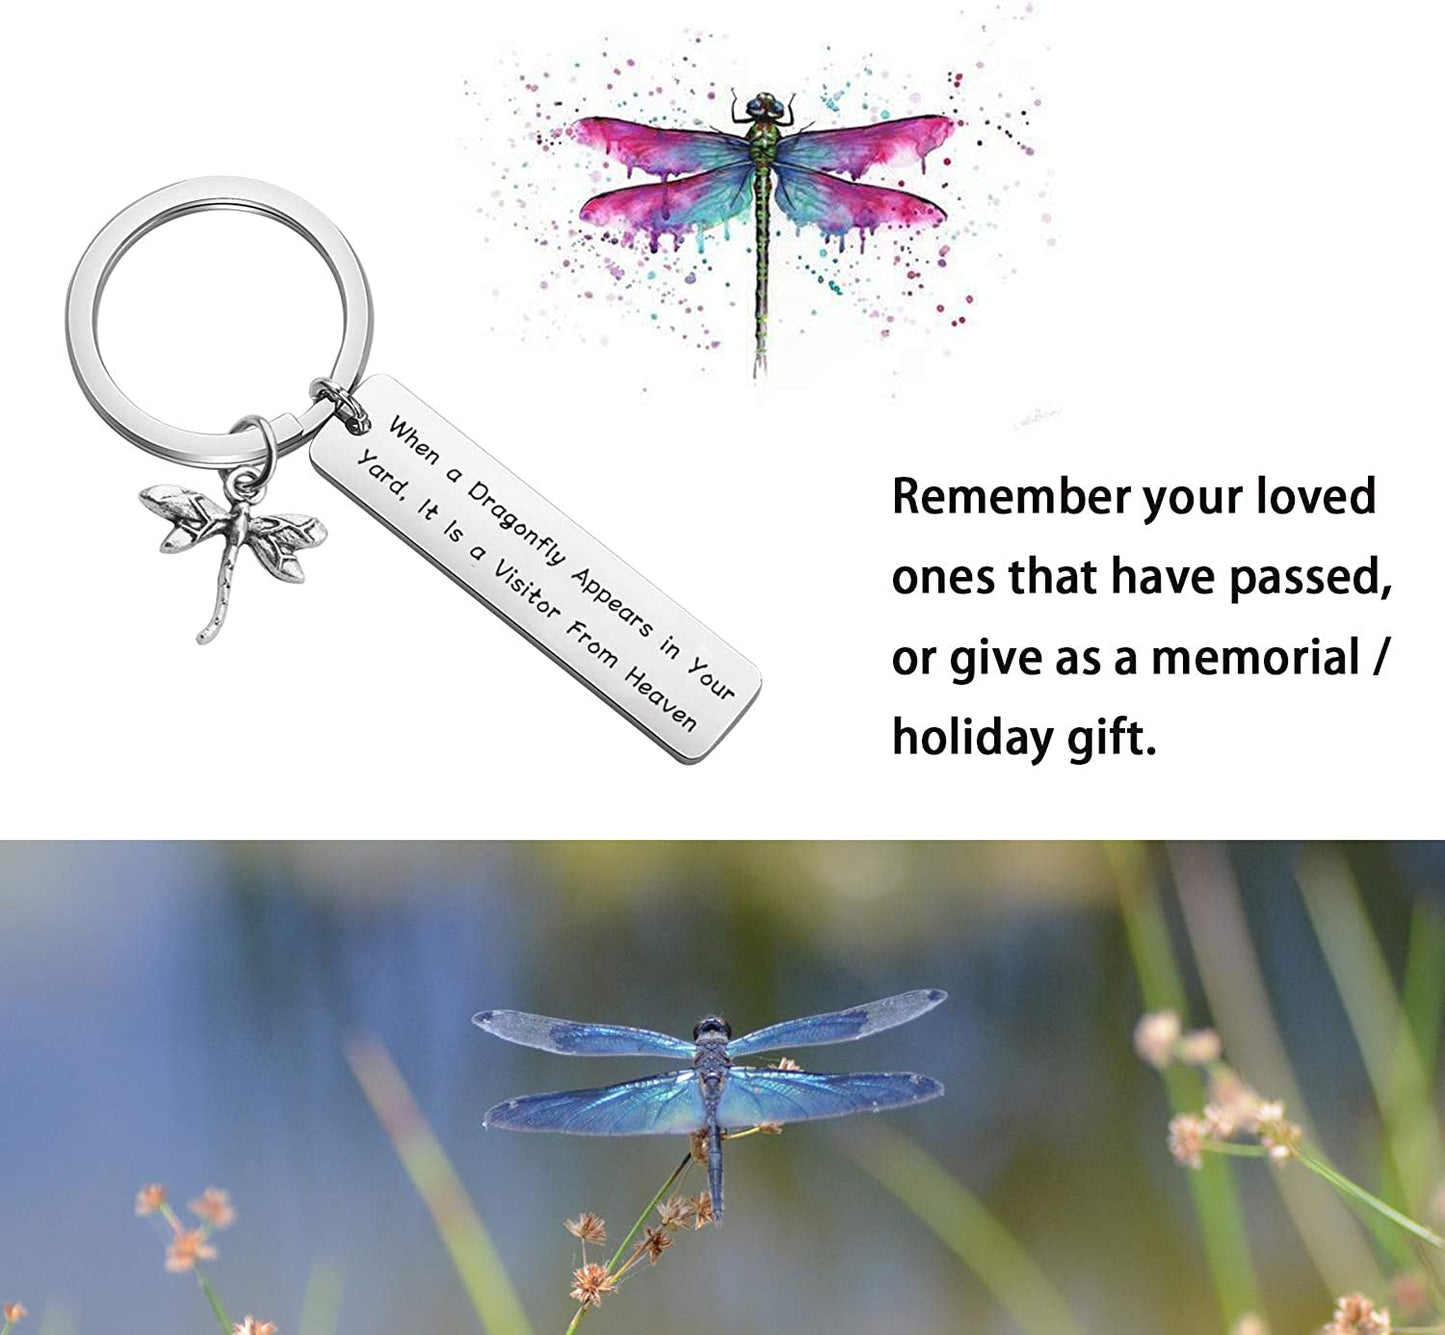 Dragonfly Gift Dragonfly Memorial Gift Loss of Love One Gift Remembrance Gift Dragonfly Lover Gift When a Dragonfly Appears in Your Yard It is a Visitor from Heaven